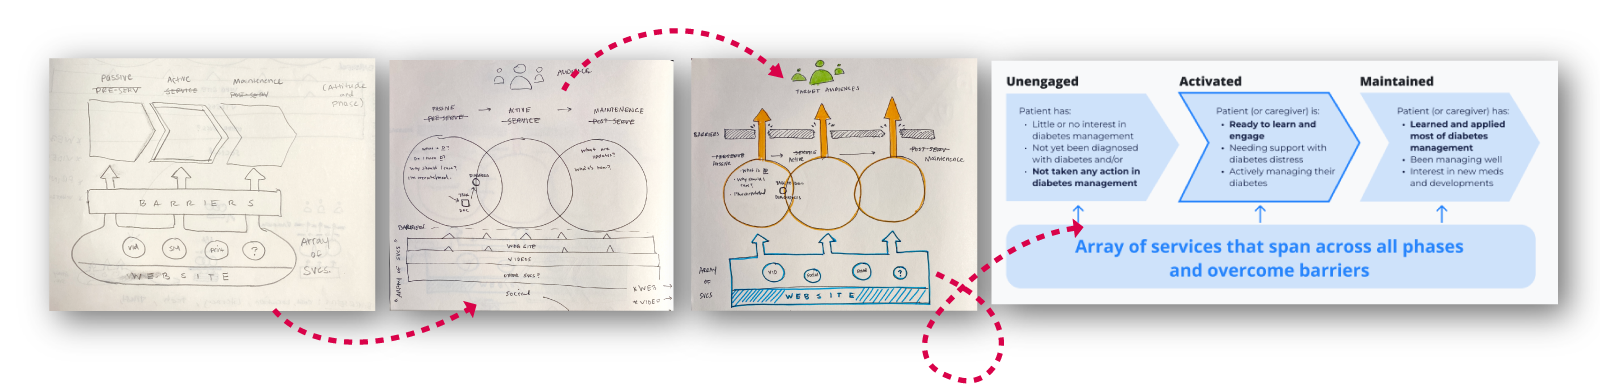 Visual showing sketched diagrams of the engagement model evolving.